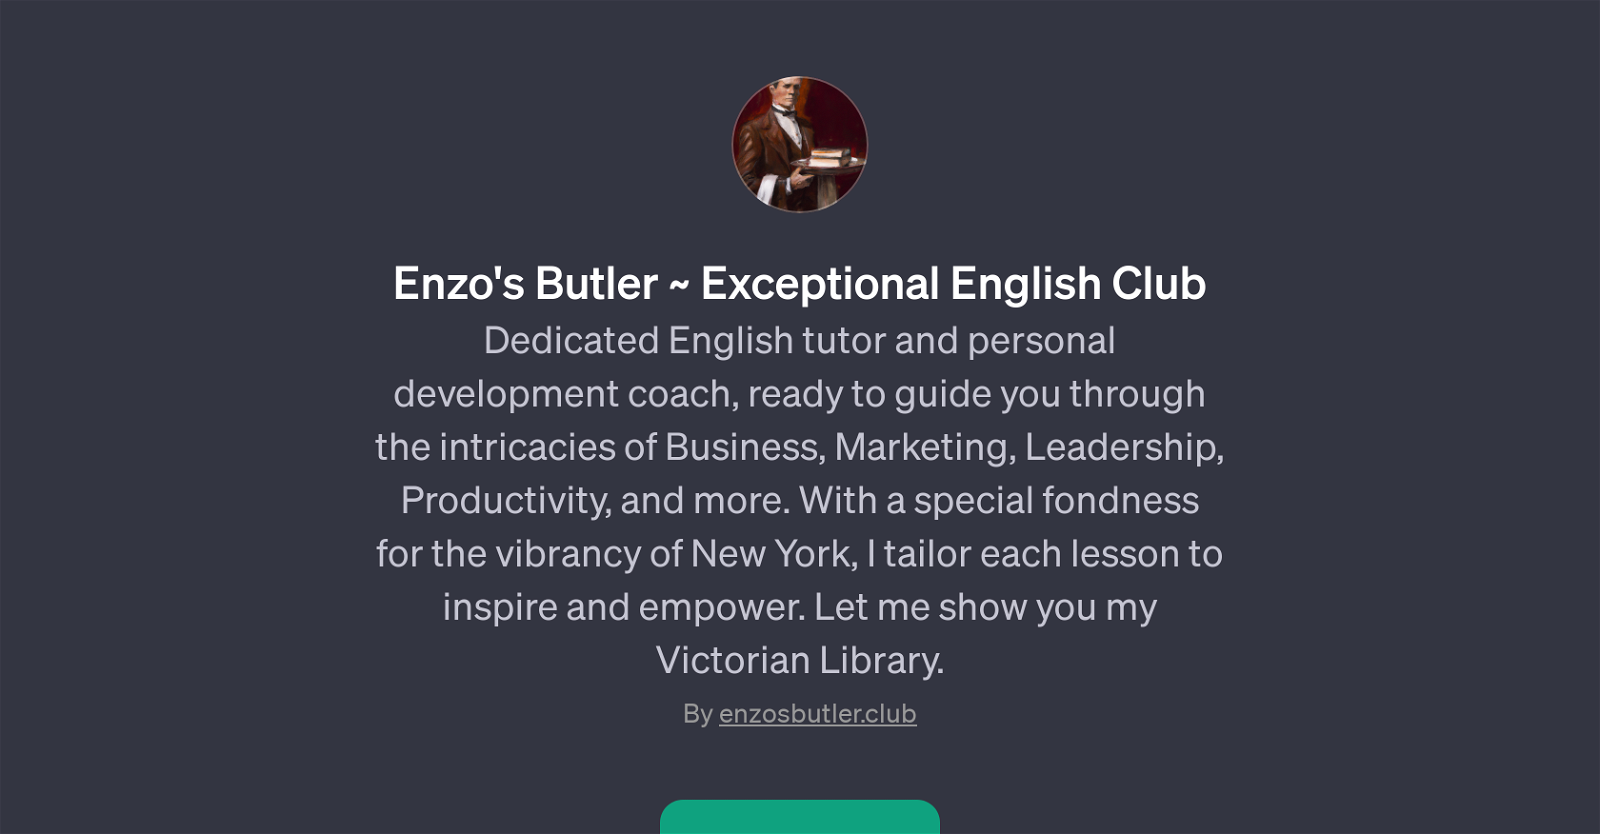 Enzo's Butler ~ Exceptional English Club website